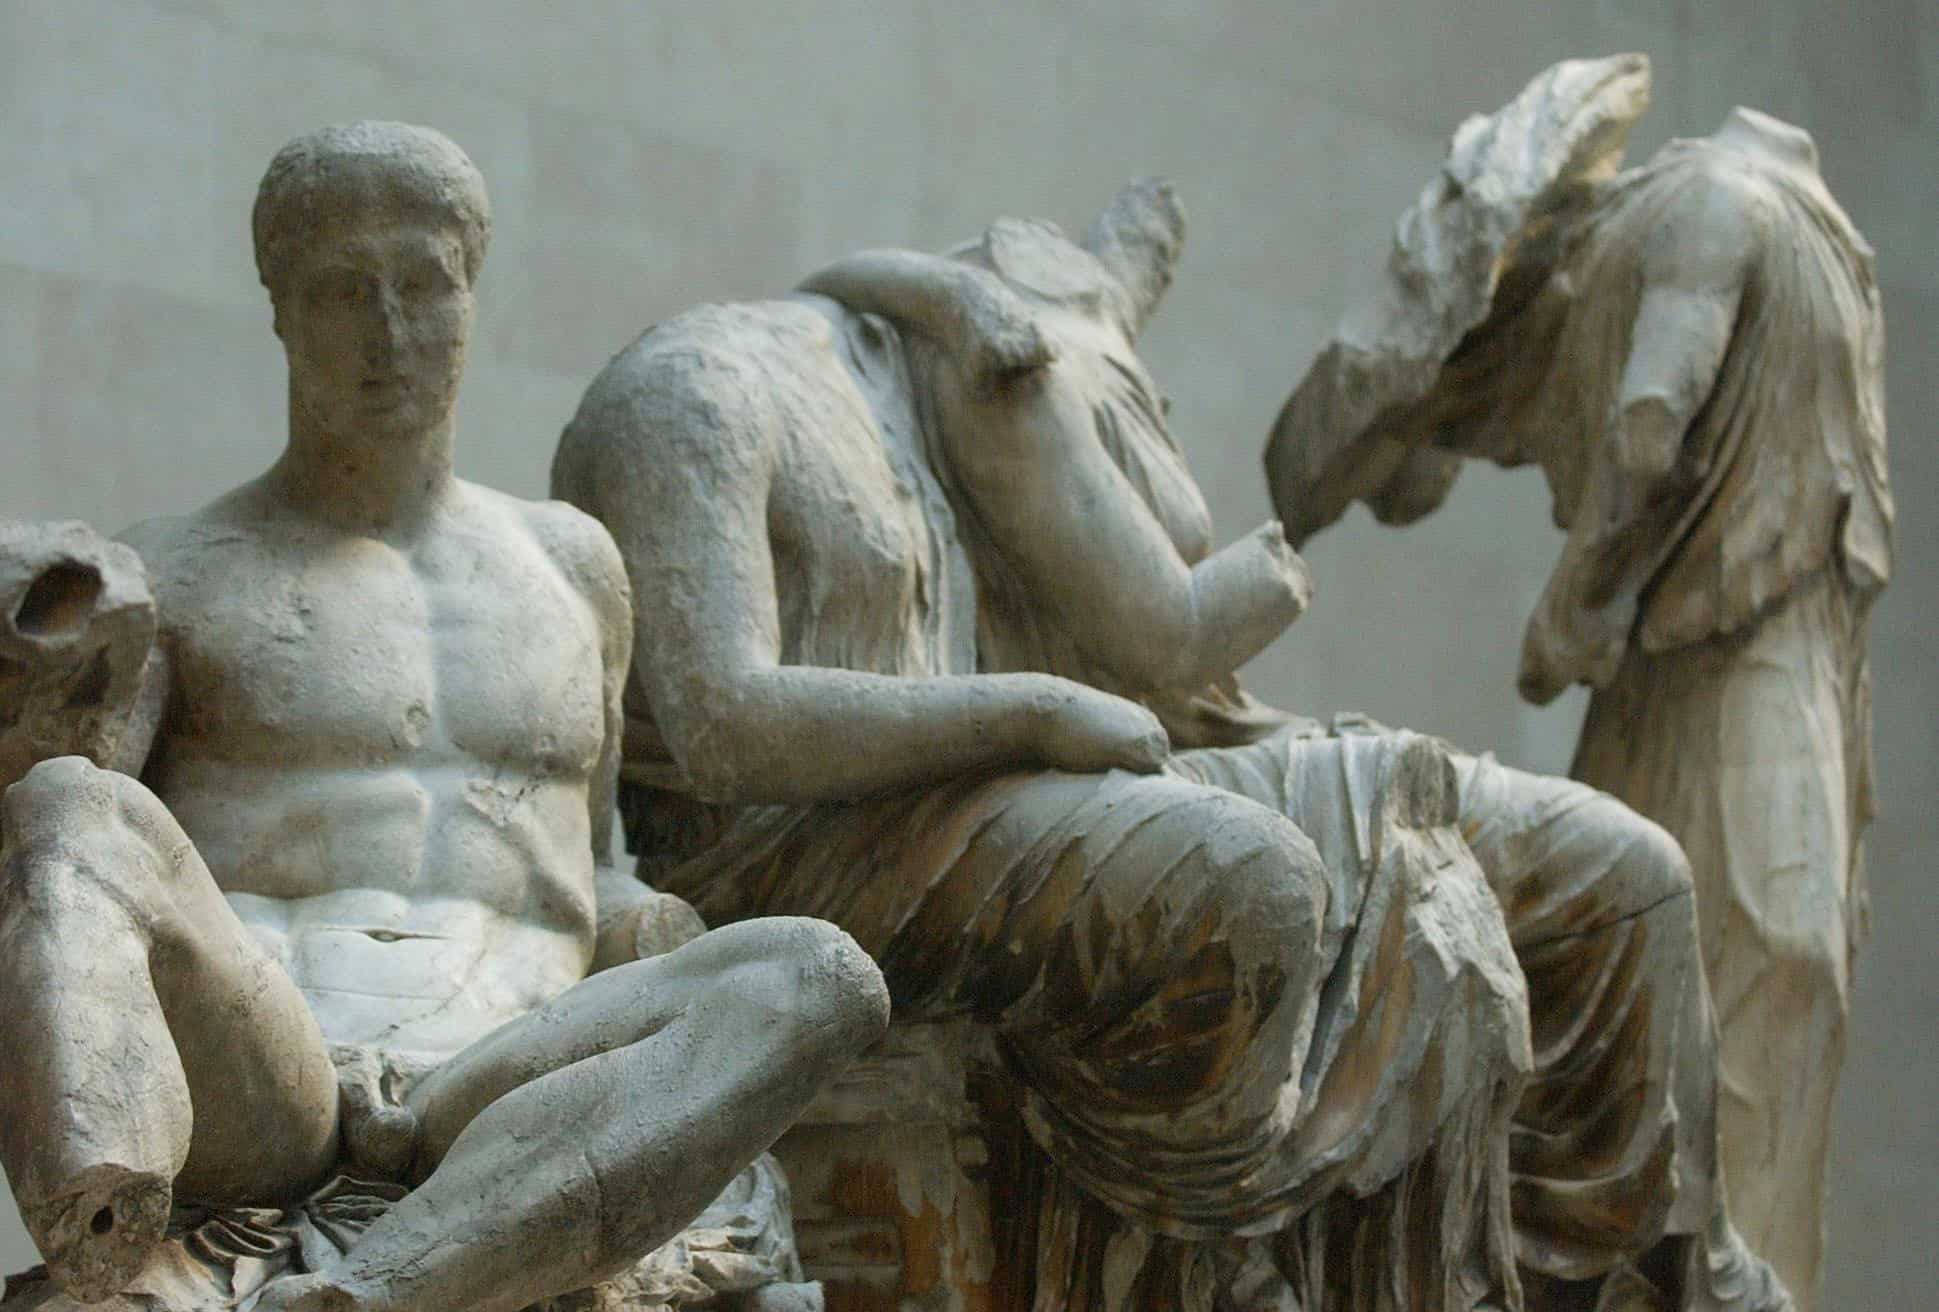 Elgin Marbles could ‘soon be returned to Greece’ as part of ‘cultural exchange’